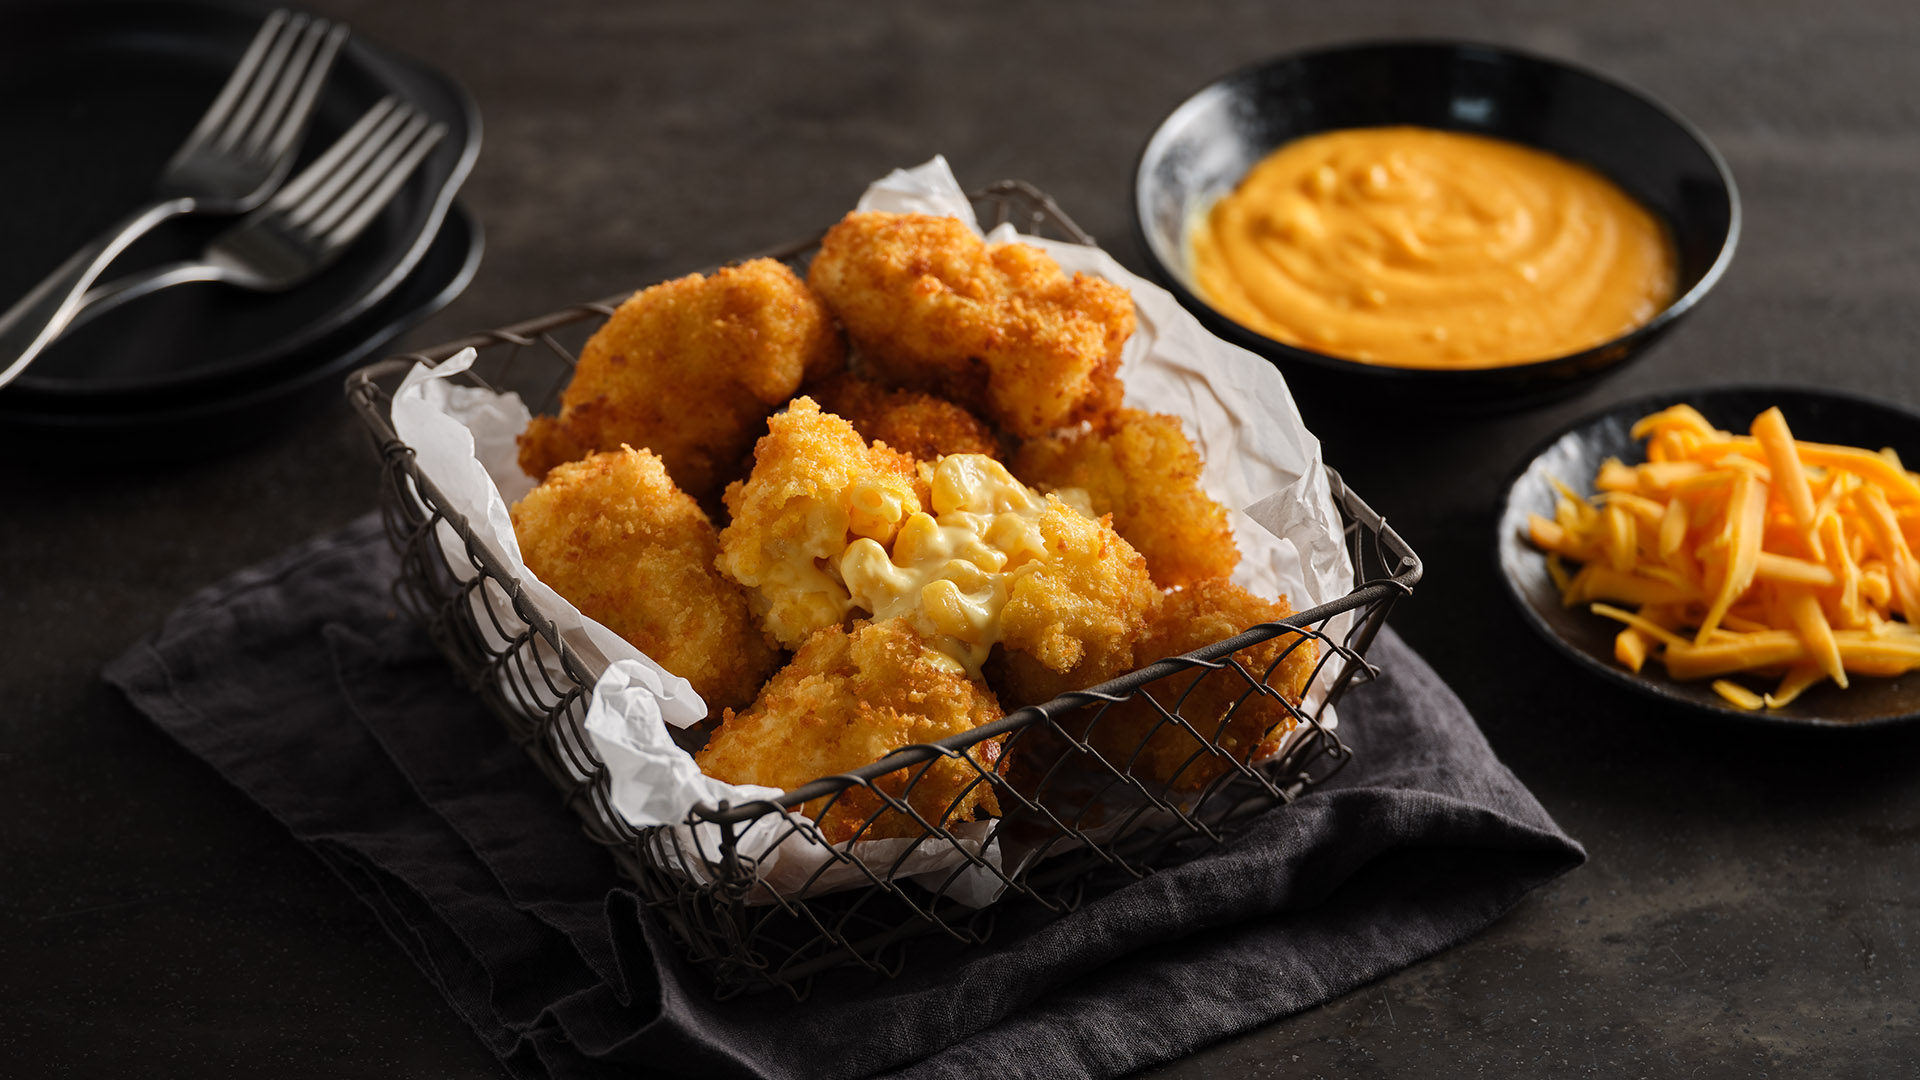 Macaroni & Cheese Croquettes on top of parchment paper in a metal, wire basket next to a round dark bowl of shredded cheese and another round bowl with cheese dip.